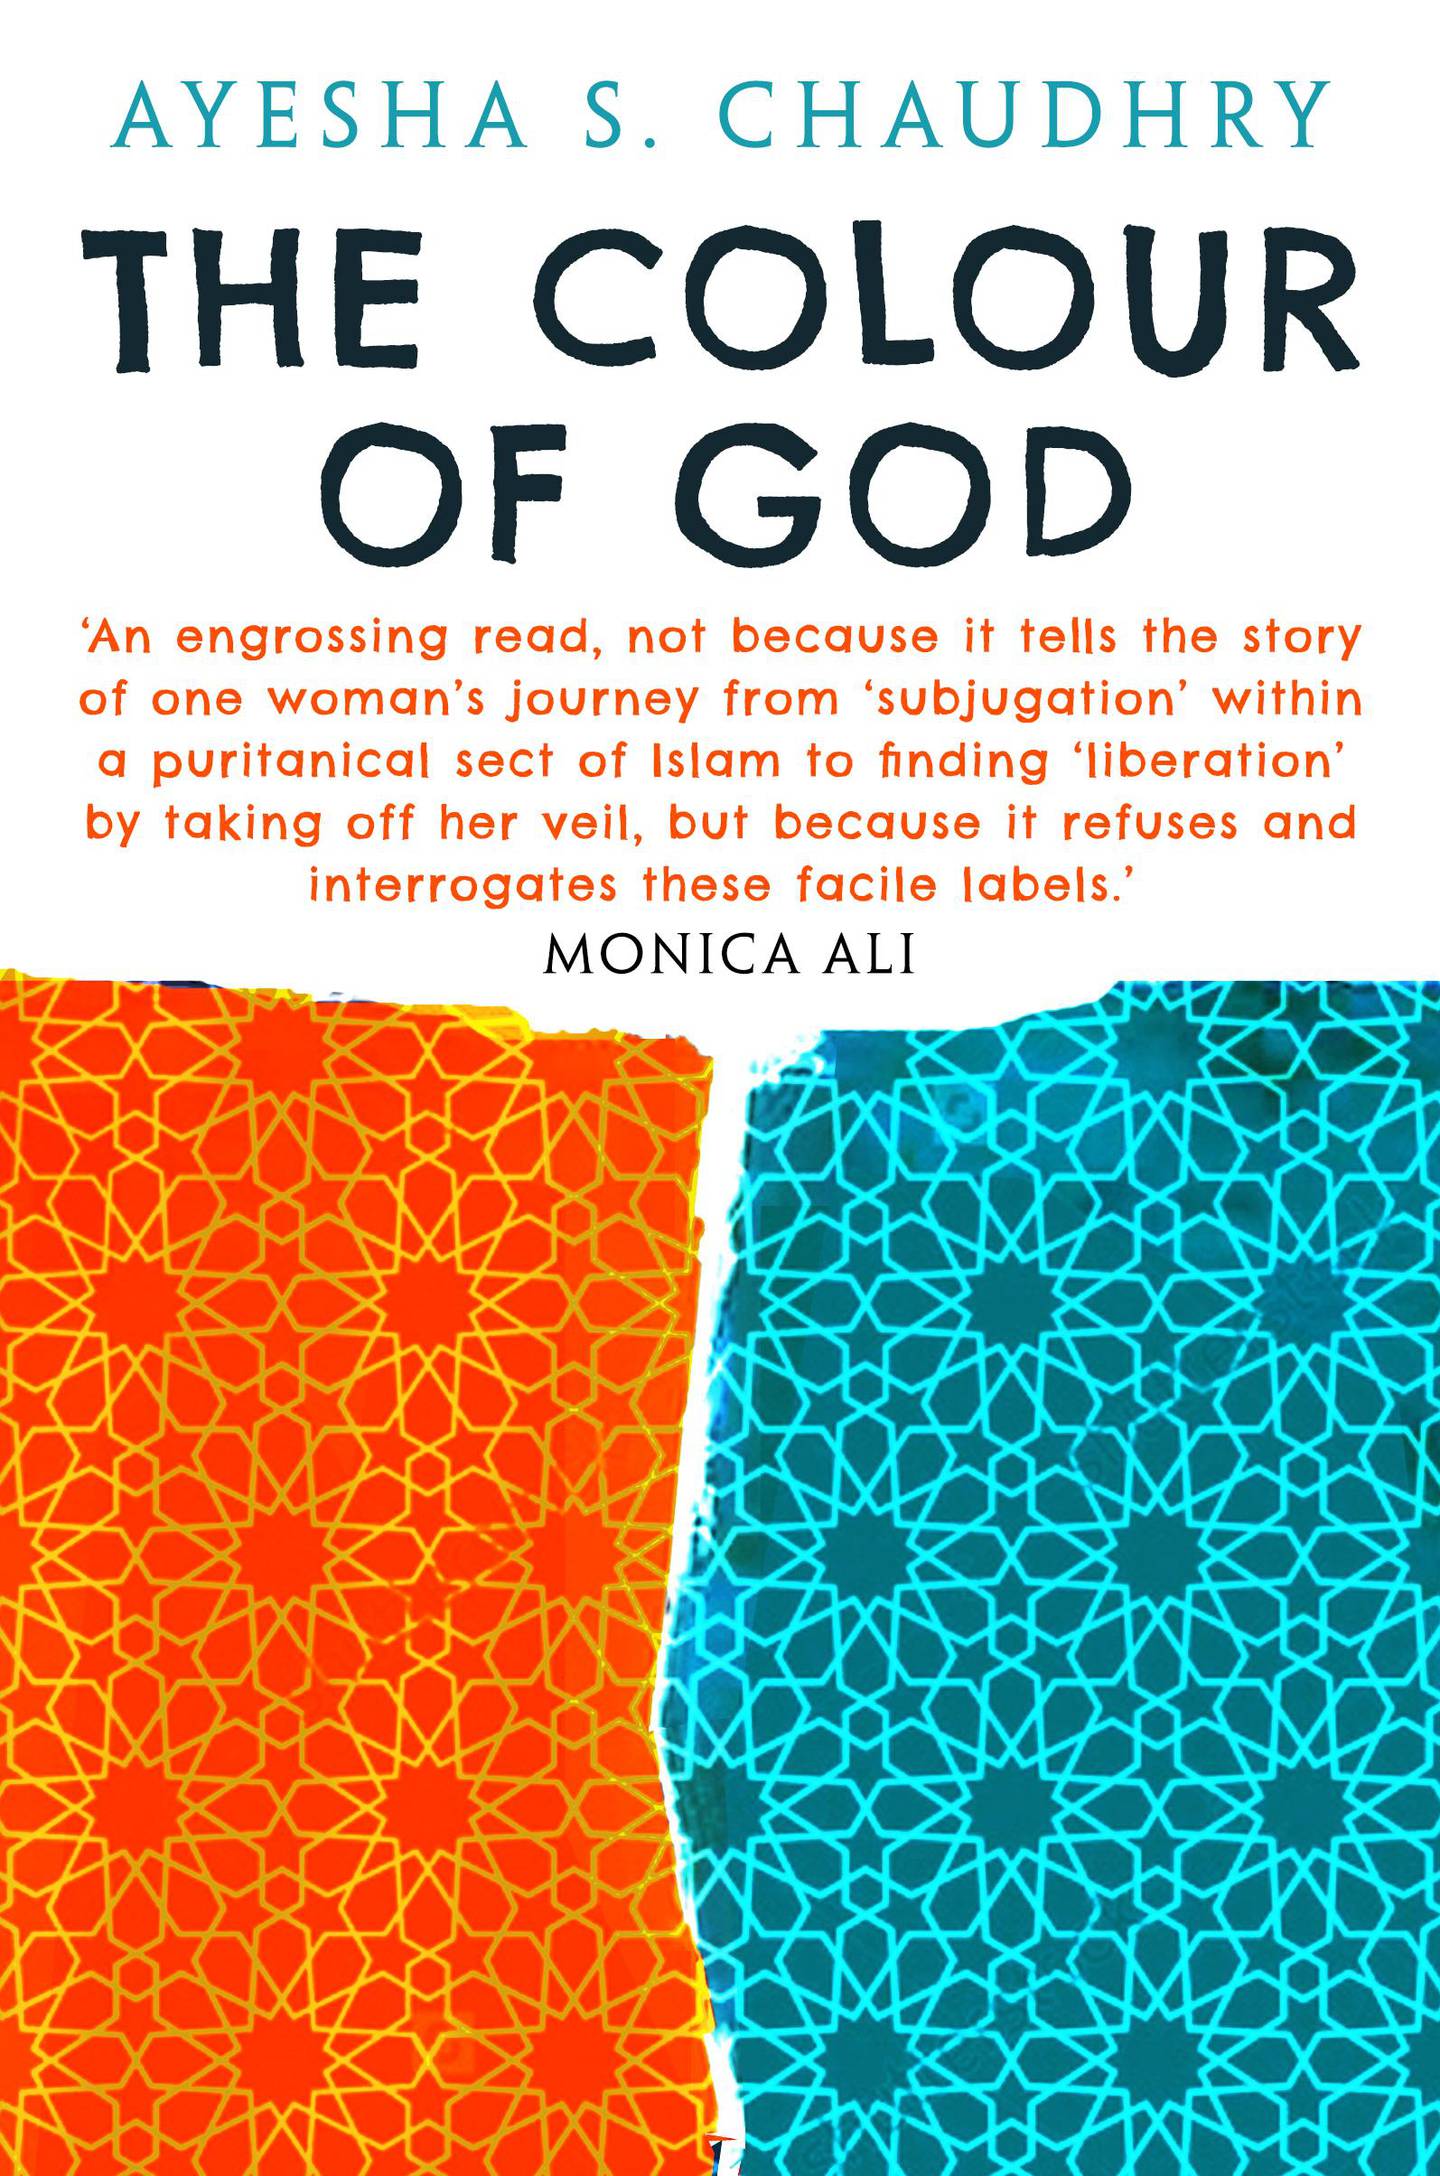 'The Colour of God' by Ayesha Chaudhry. Oneworld Publications